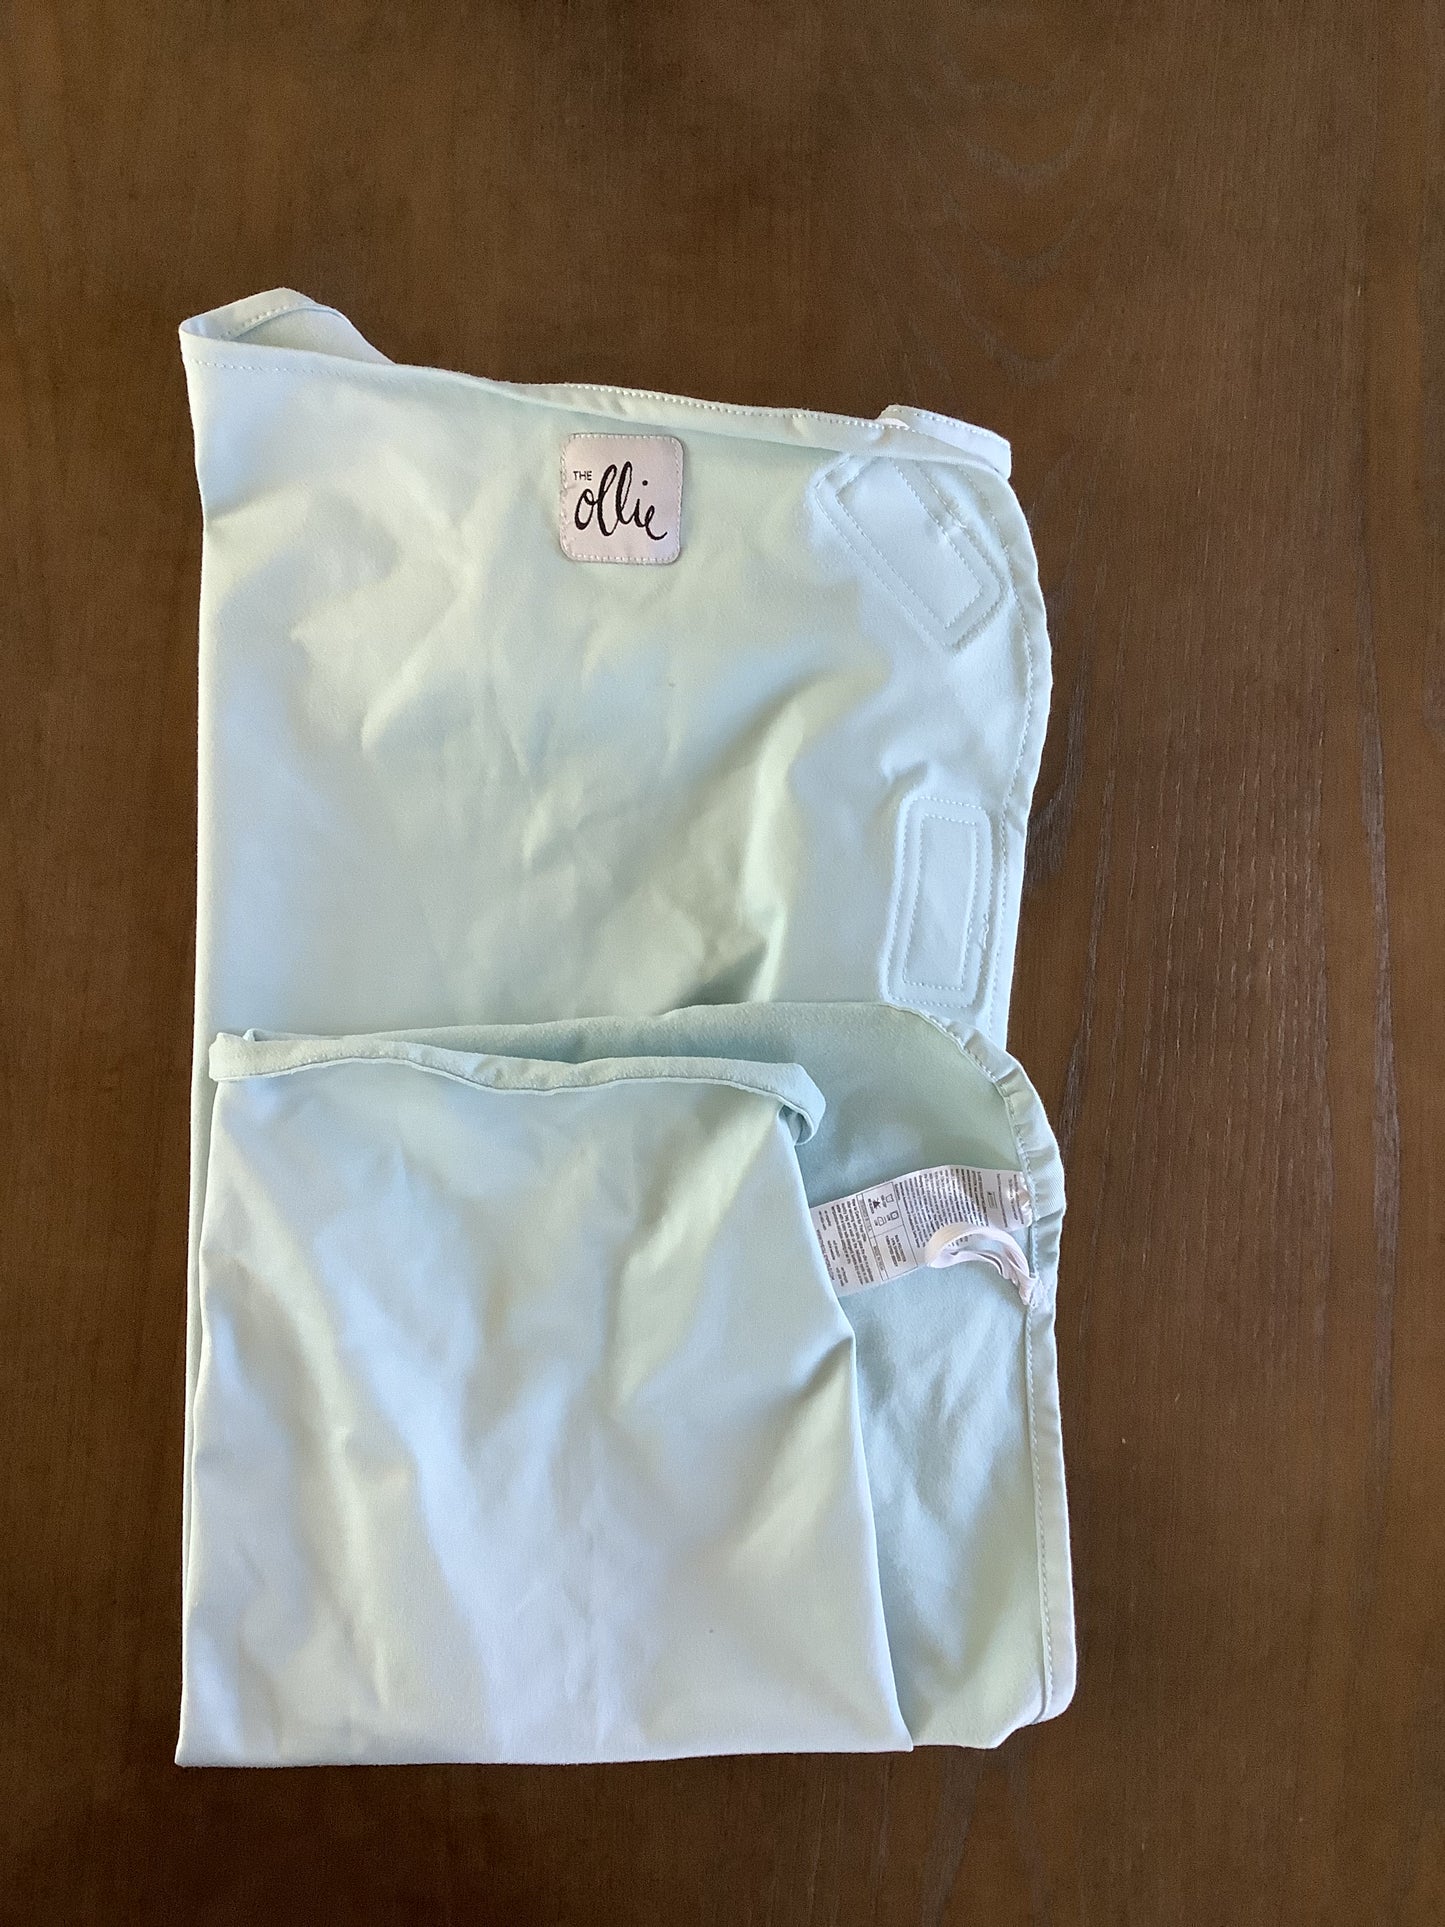 The Ollie Swaddle sky green